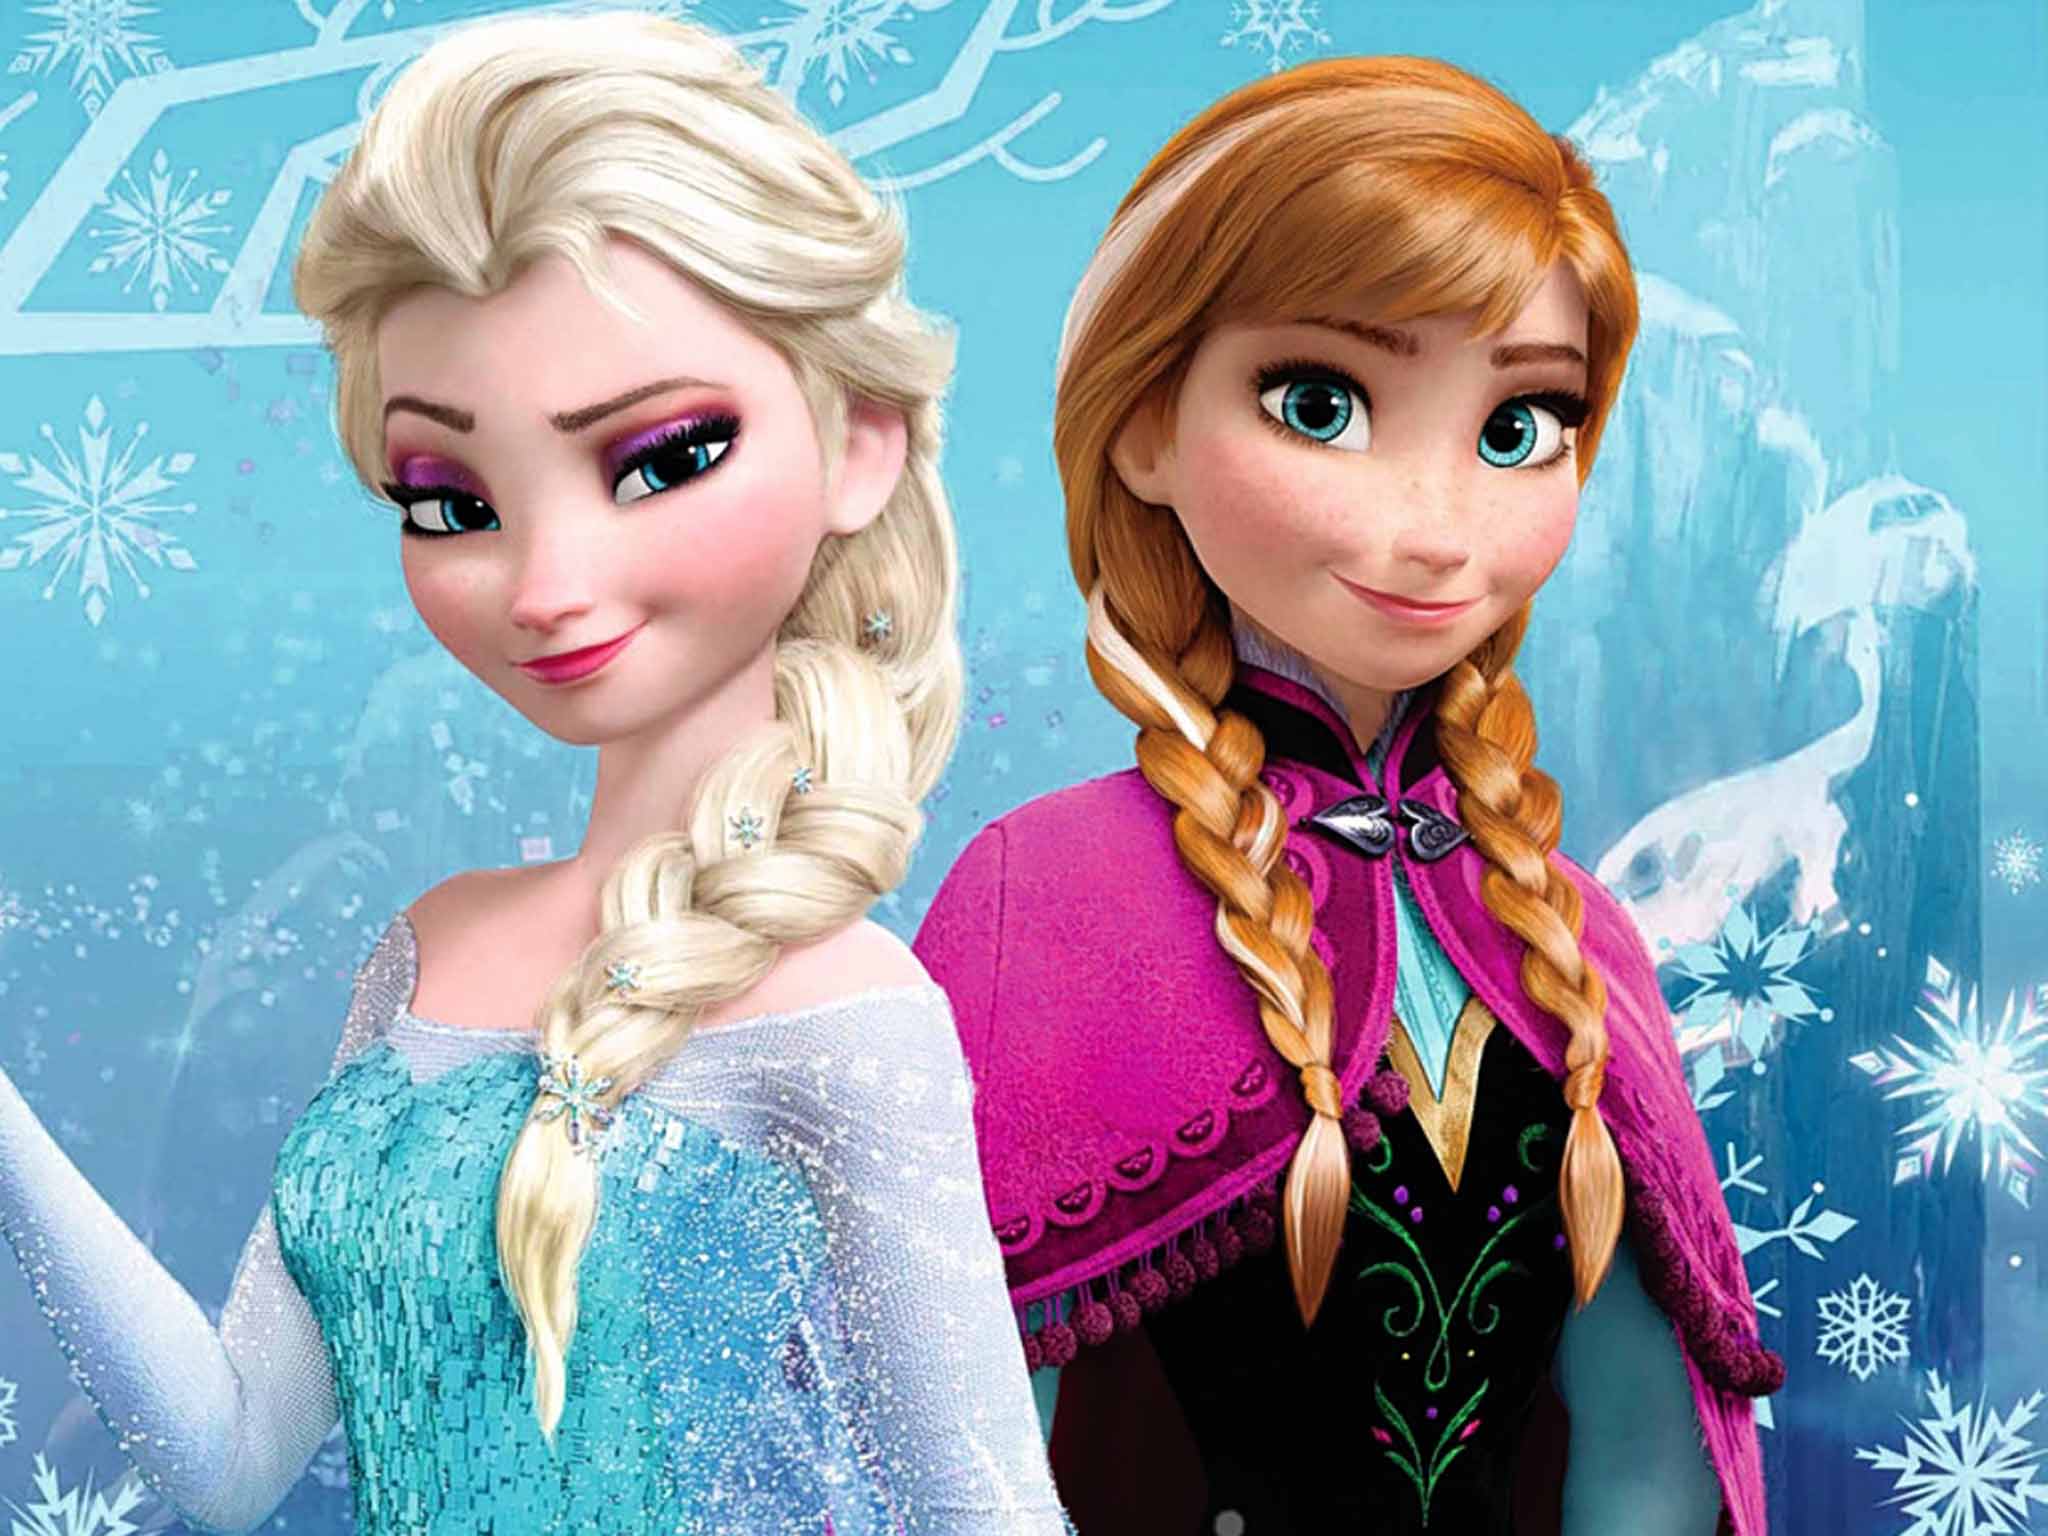 The sisterly love between Elsa and Anna made Frozen hugely popular